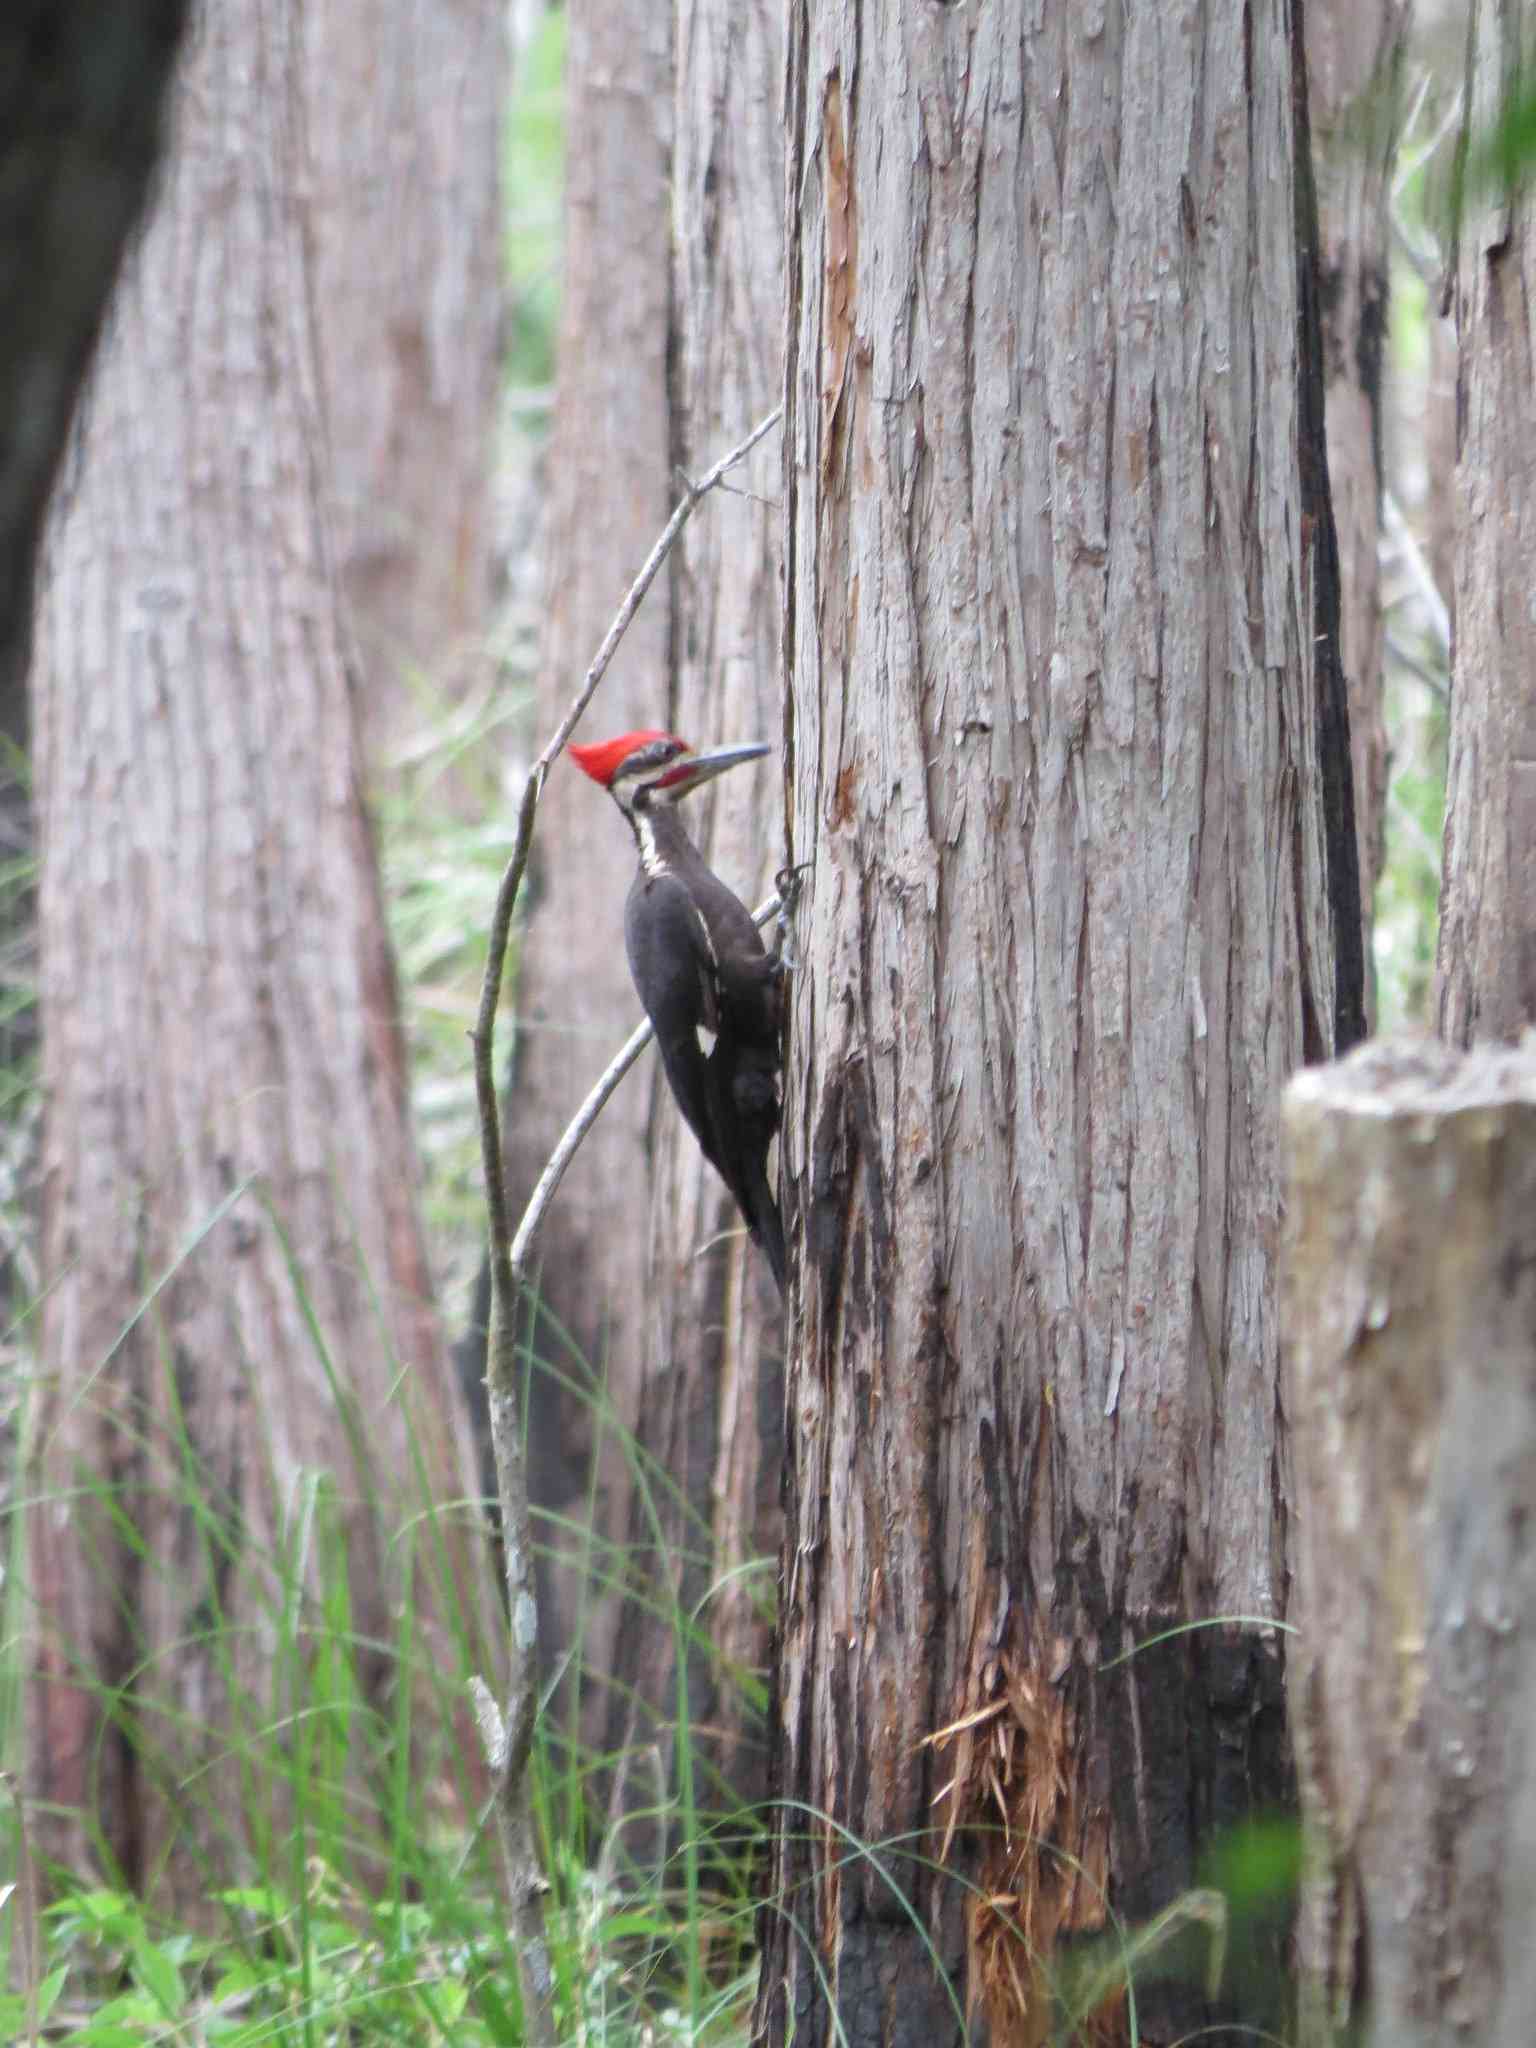 A pileated woodpecker in Okefenokee NWR